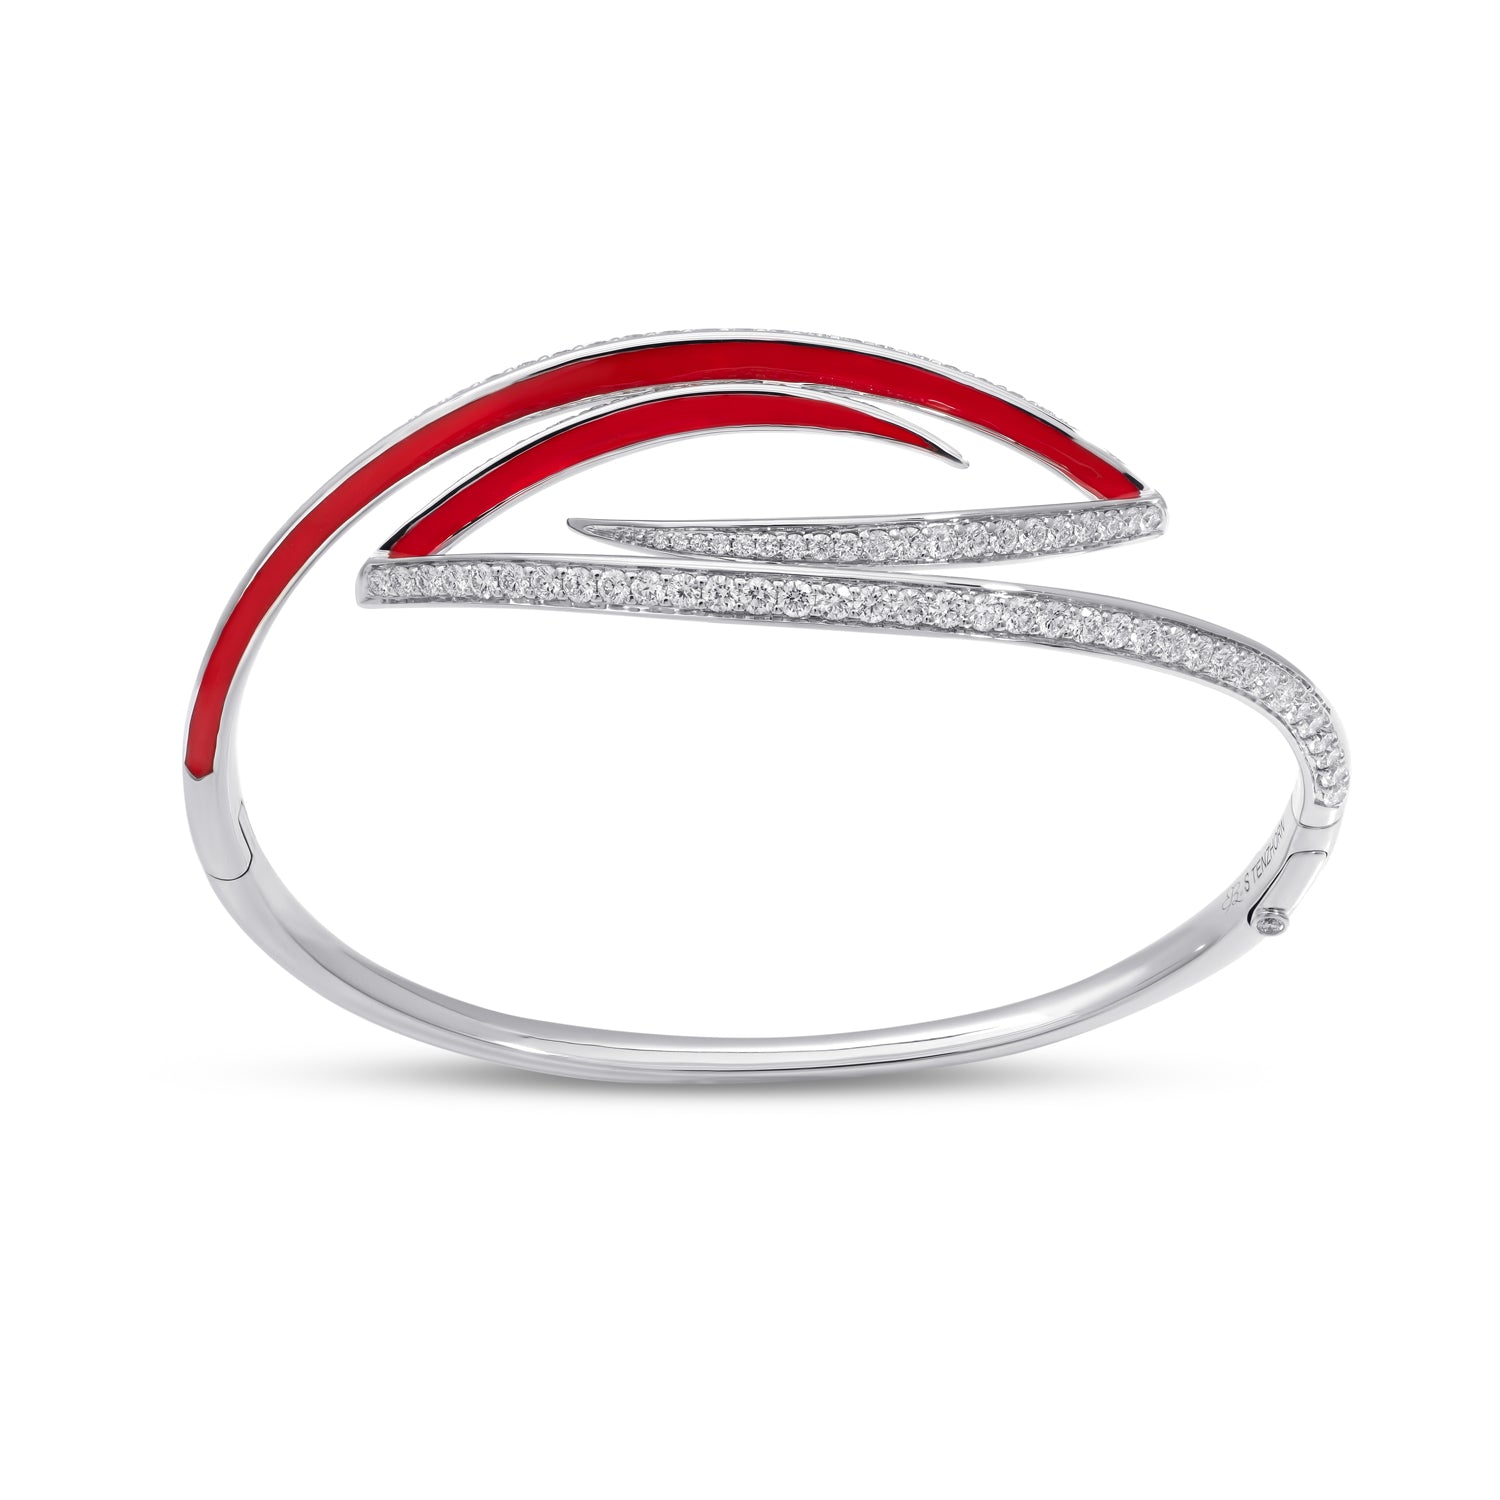 VIVA Curved Bangle with Diamonds and Red Enamel